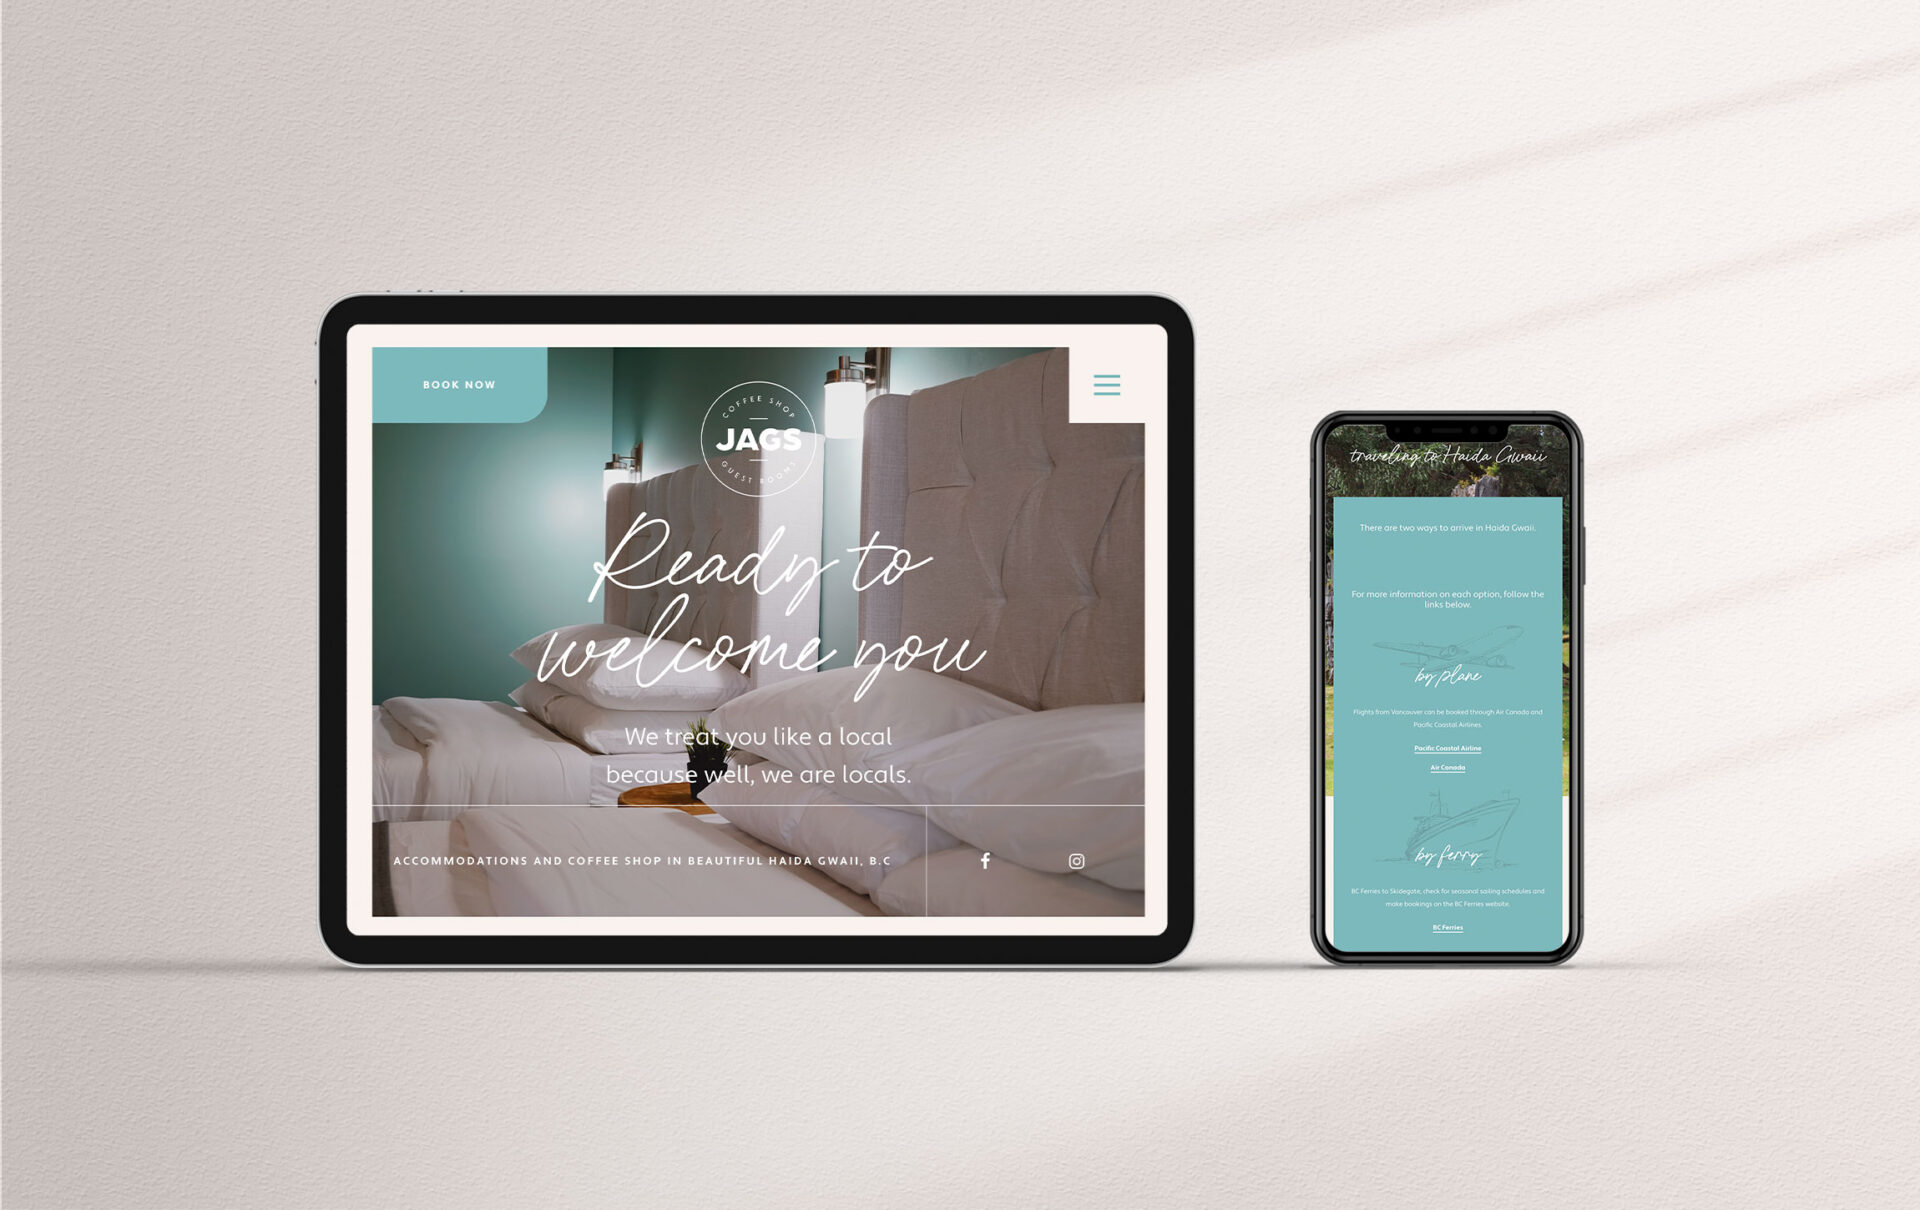 Studiothink is a Vancouver Web Design and Branding Agency